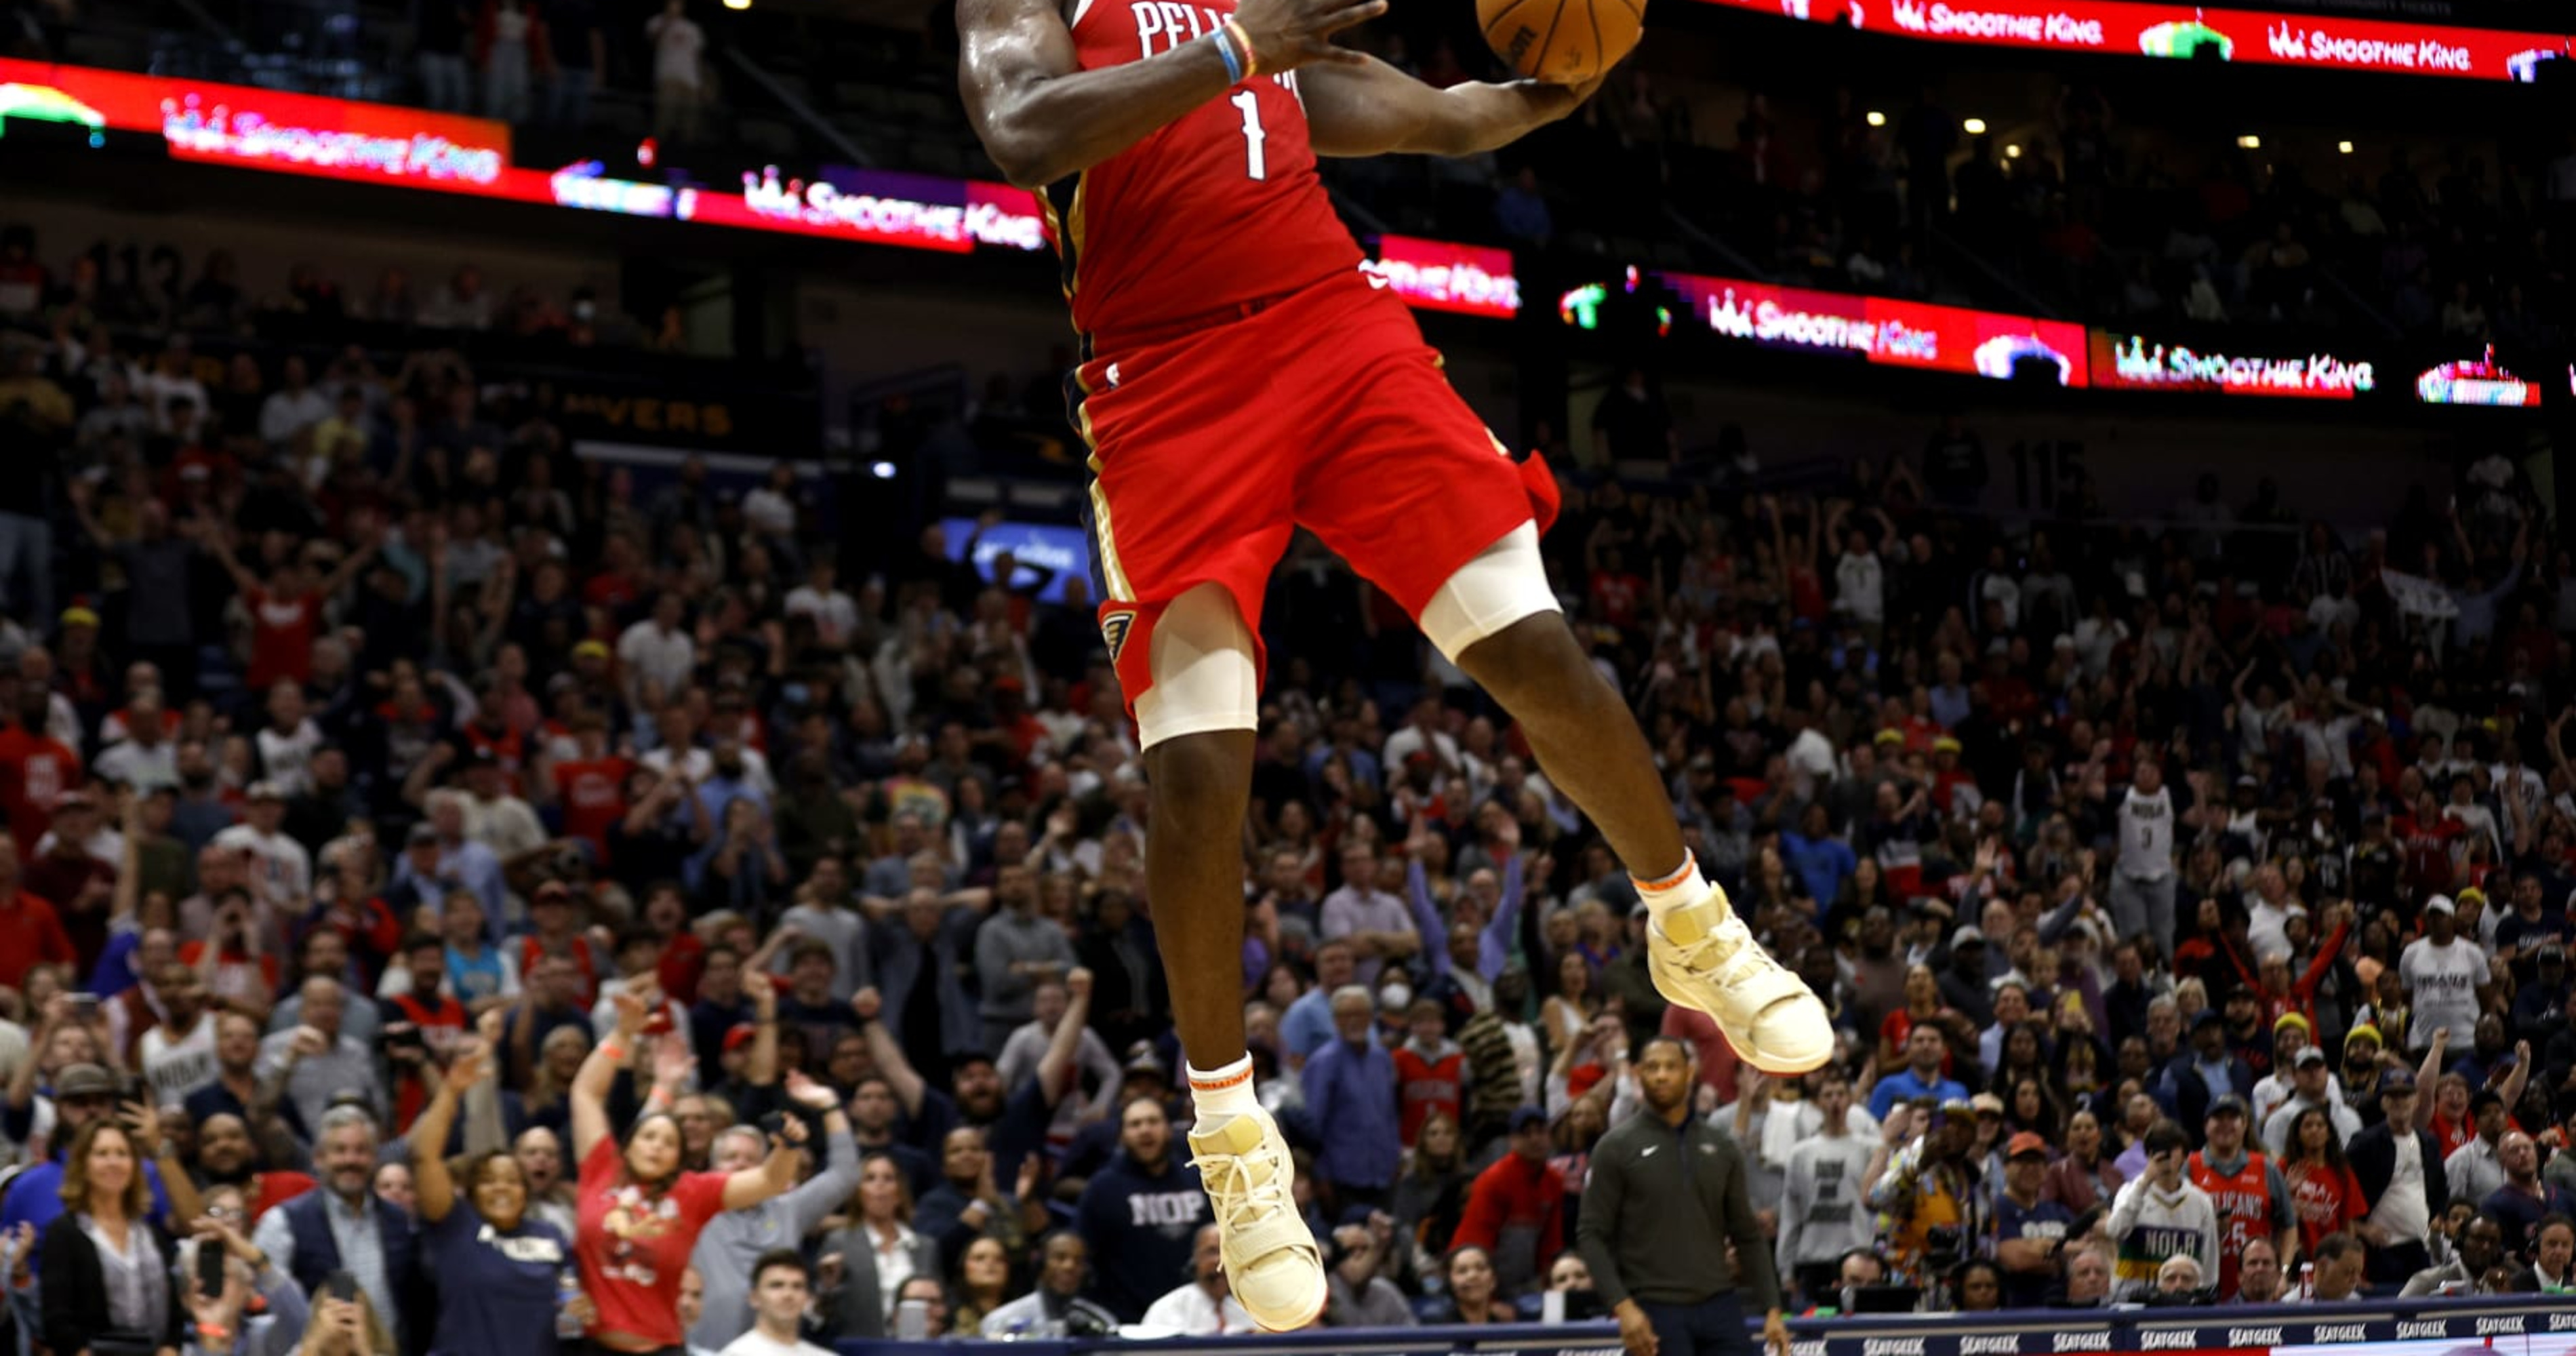 Zion Williamson will consider NBA slam dunk contest in next 2 years